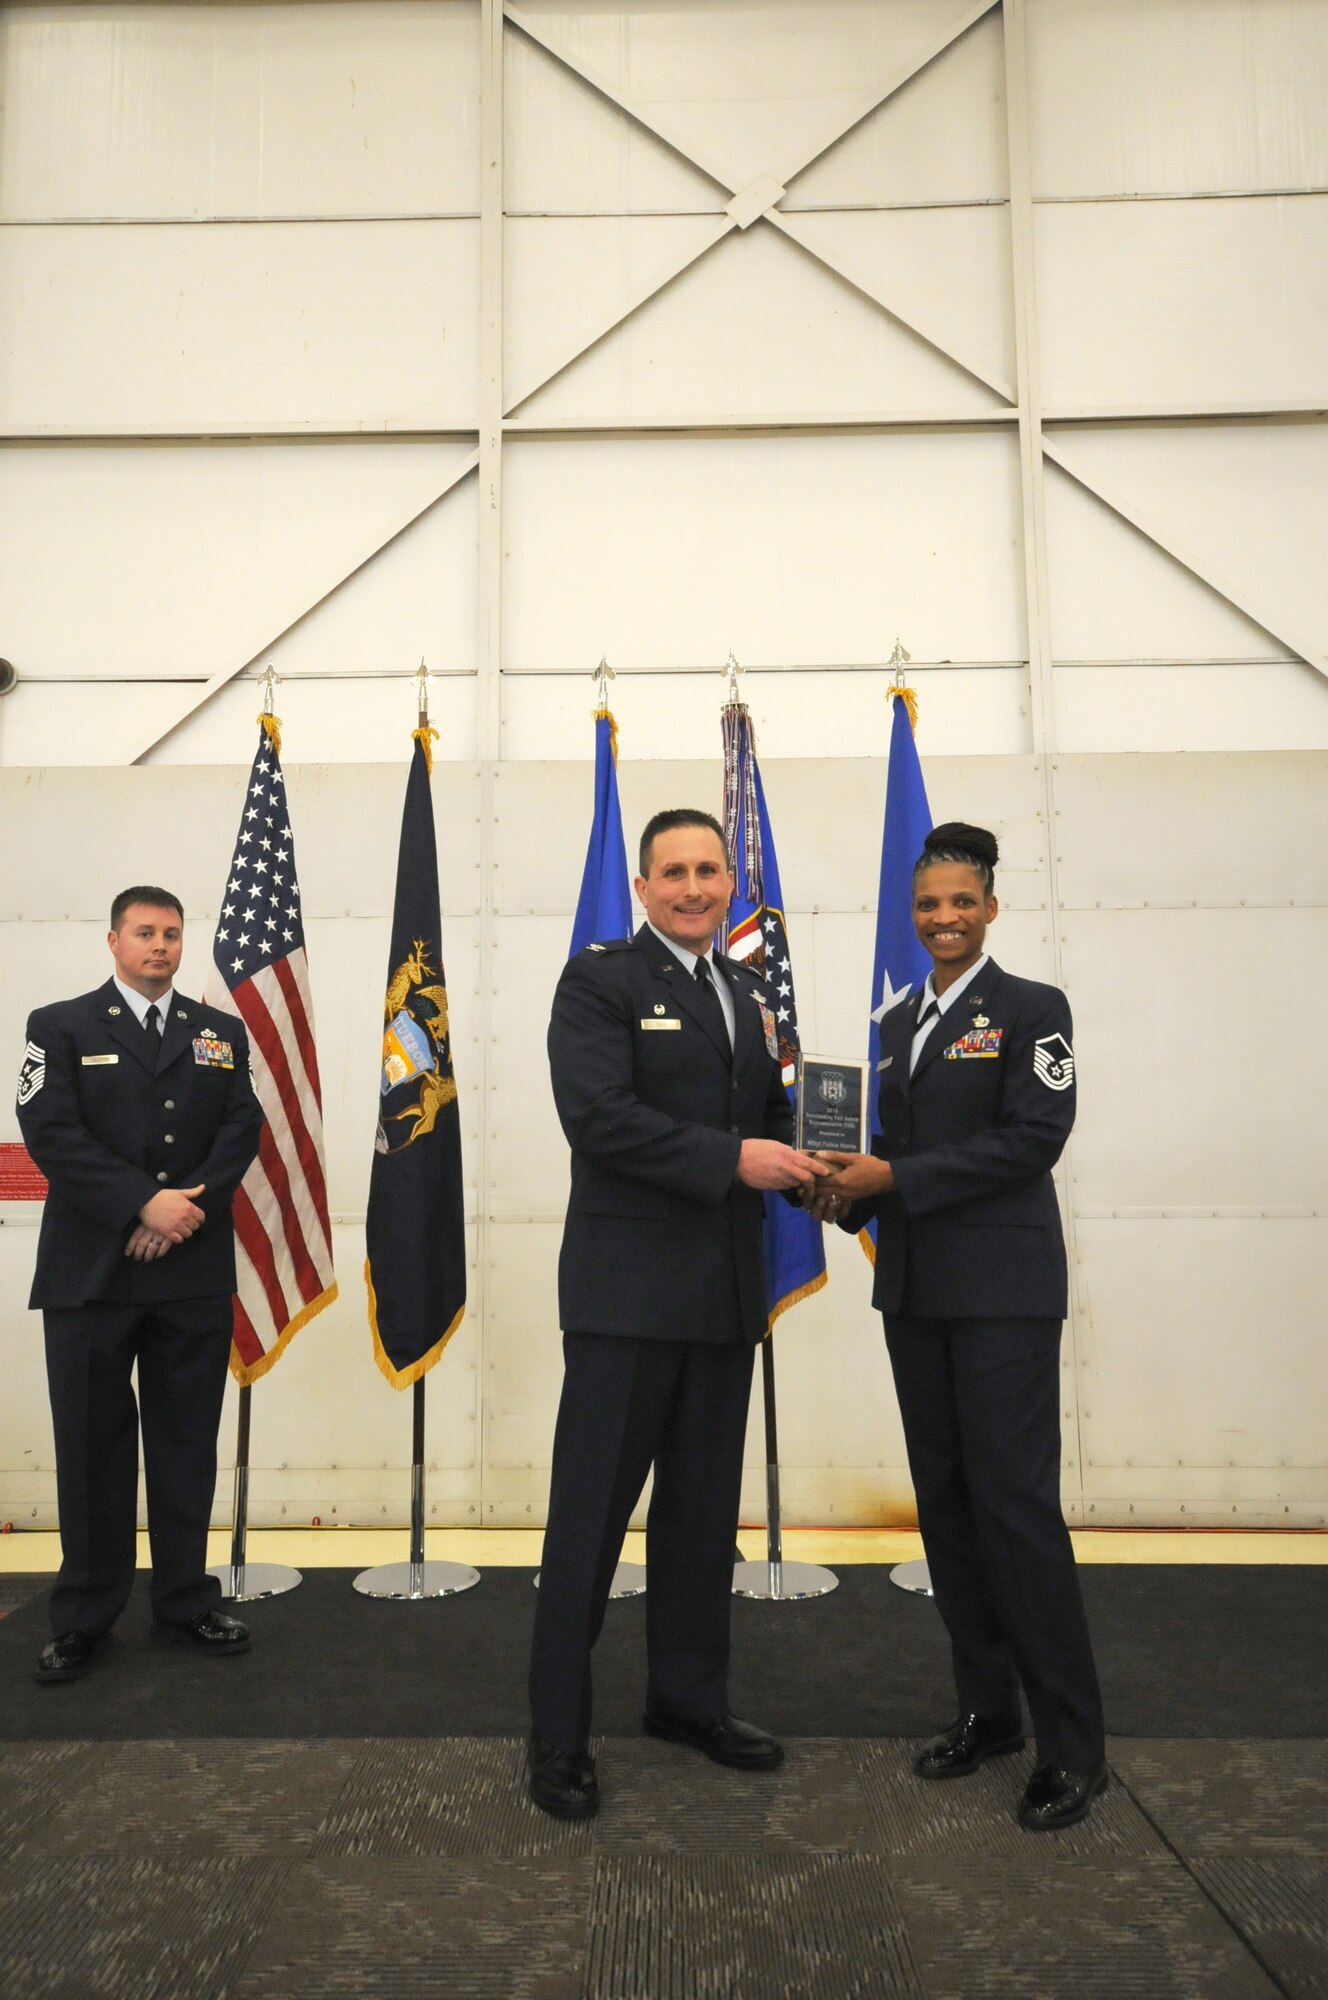 Col. Bryan Teff announces and congratulates the 2015 Airman of the Year recipients, Saturday, December 5, 2015, Battle Creek Air National Guard Base, Mich. Members awarded include, Airman of the Year, Senior Airman Erik Elliot, 110th Operations Support Squadron, Non-Commissioned Officer of Year, Tech. Sgt. Richard Parker II, 217th Air Component Operations Squadron, Senior Non-Commissioned Officer of the Year, Master Sgt. Carl Westphal II, 217th Air Operations Squadron, Company Grade Officer of the Year, 1st Lt. Justin Andrews, 217th Air Component Operations Squadron, 1st Sgt. of the Year, Master Sgt. Darrell Kingsbury, 217th Air Operations Group, Honor Guard Member of the Year, Staff Sgt. Amanda Bean, Battle Creek Air National Guard Enlisted Memorial Scholarship recipient, Jacob Zahm, annual 110th Attack Wing Outstanding Unit Safety Representative, Master Sgt. Felica Harris, and Outstanding Individual Safety Contribution, Master Sgt. Luke Wimby, and 110th Attack Wing Guardsman of the year, Staff Sgt. Amanda Bean. (Air National Guard Photo by Master Sgt. Sonia Pawloski/released)